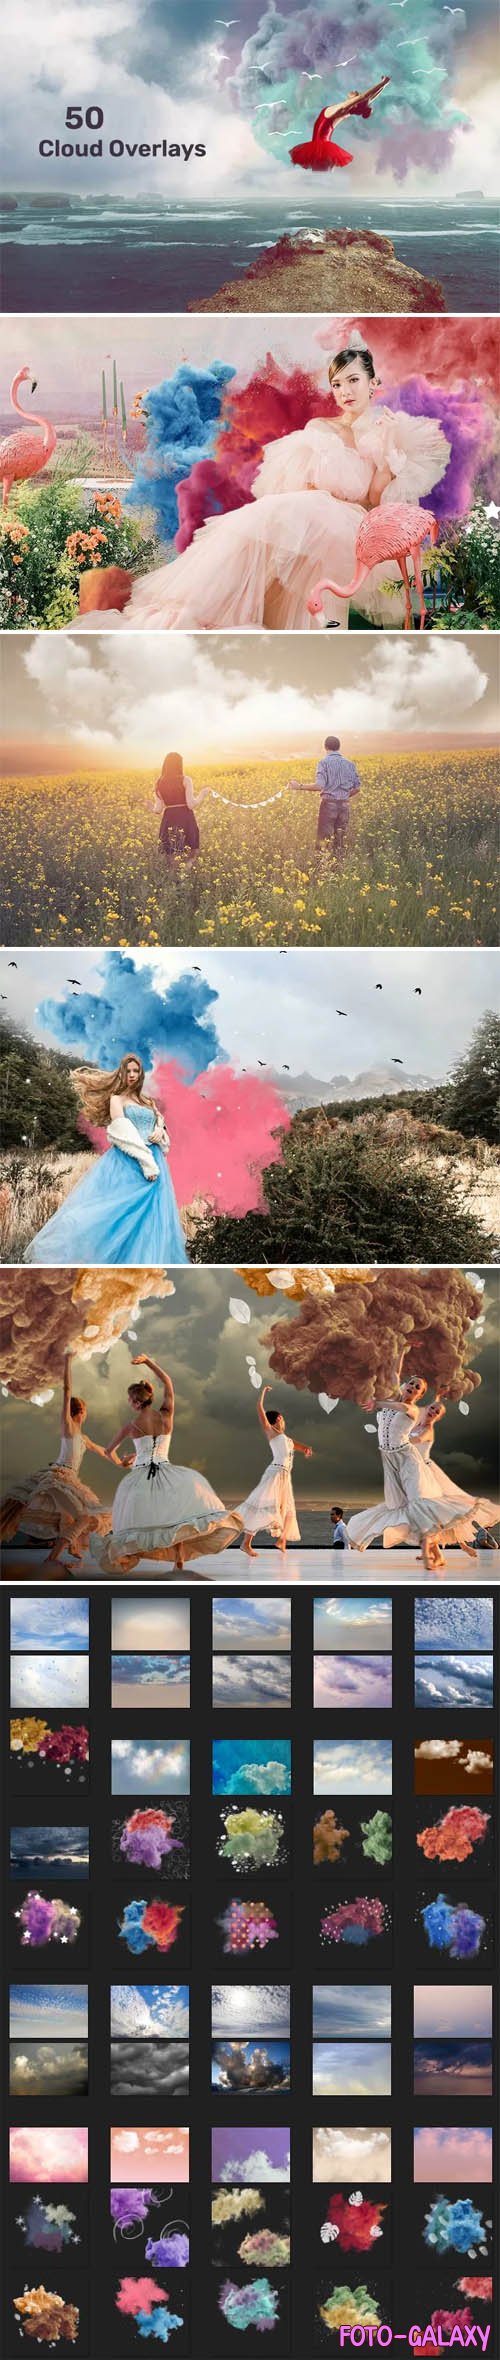 50 Cloud Overlays Collection for Photoshop